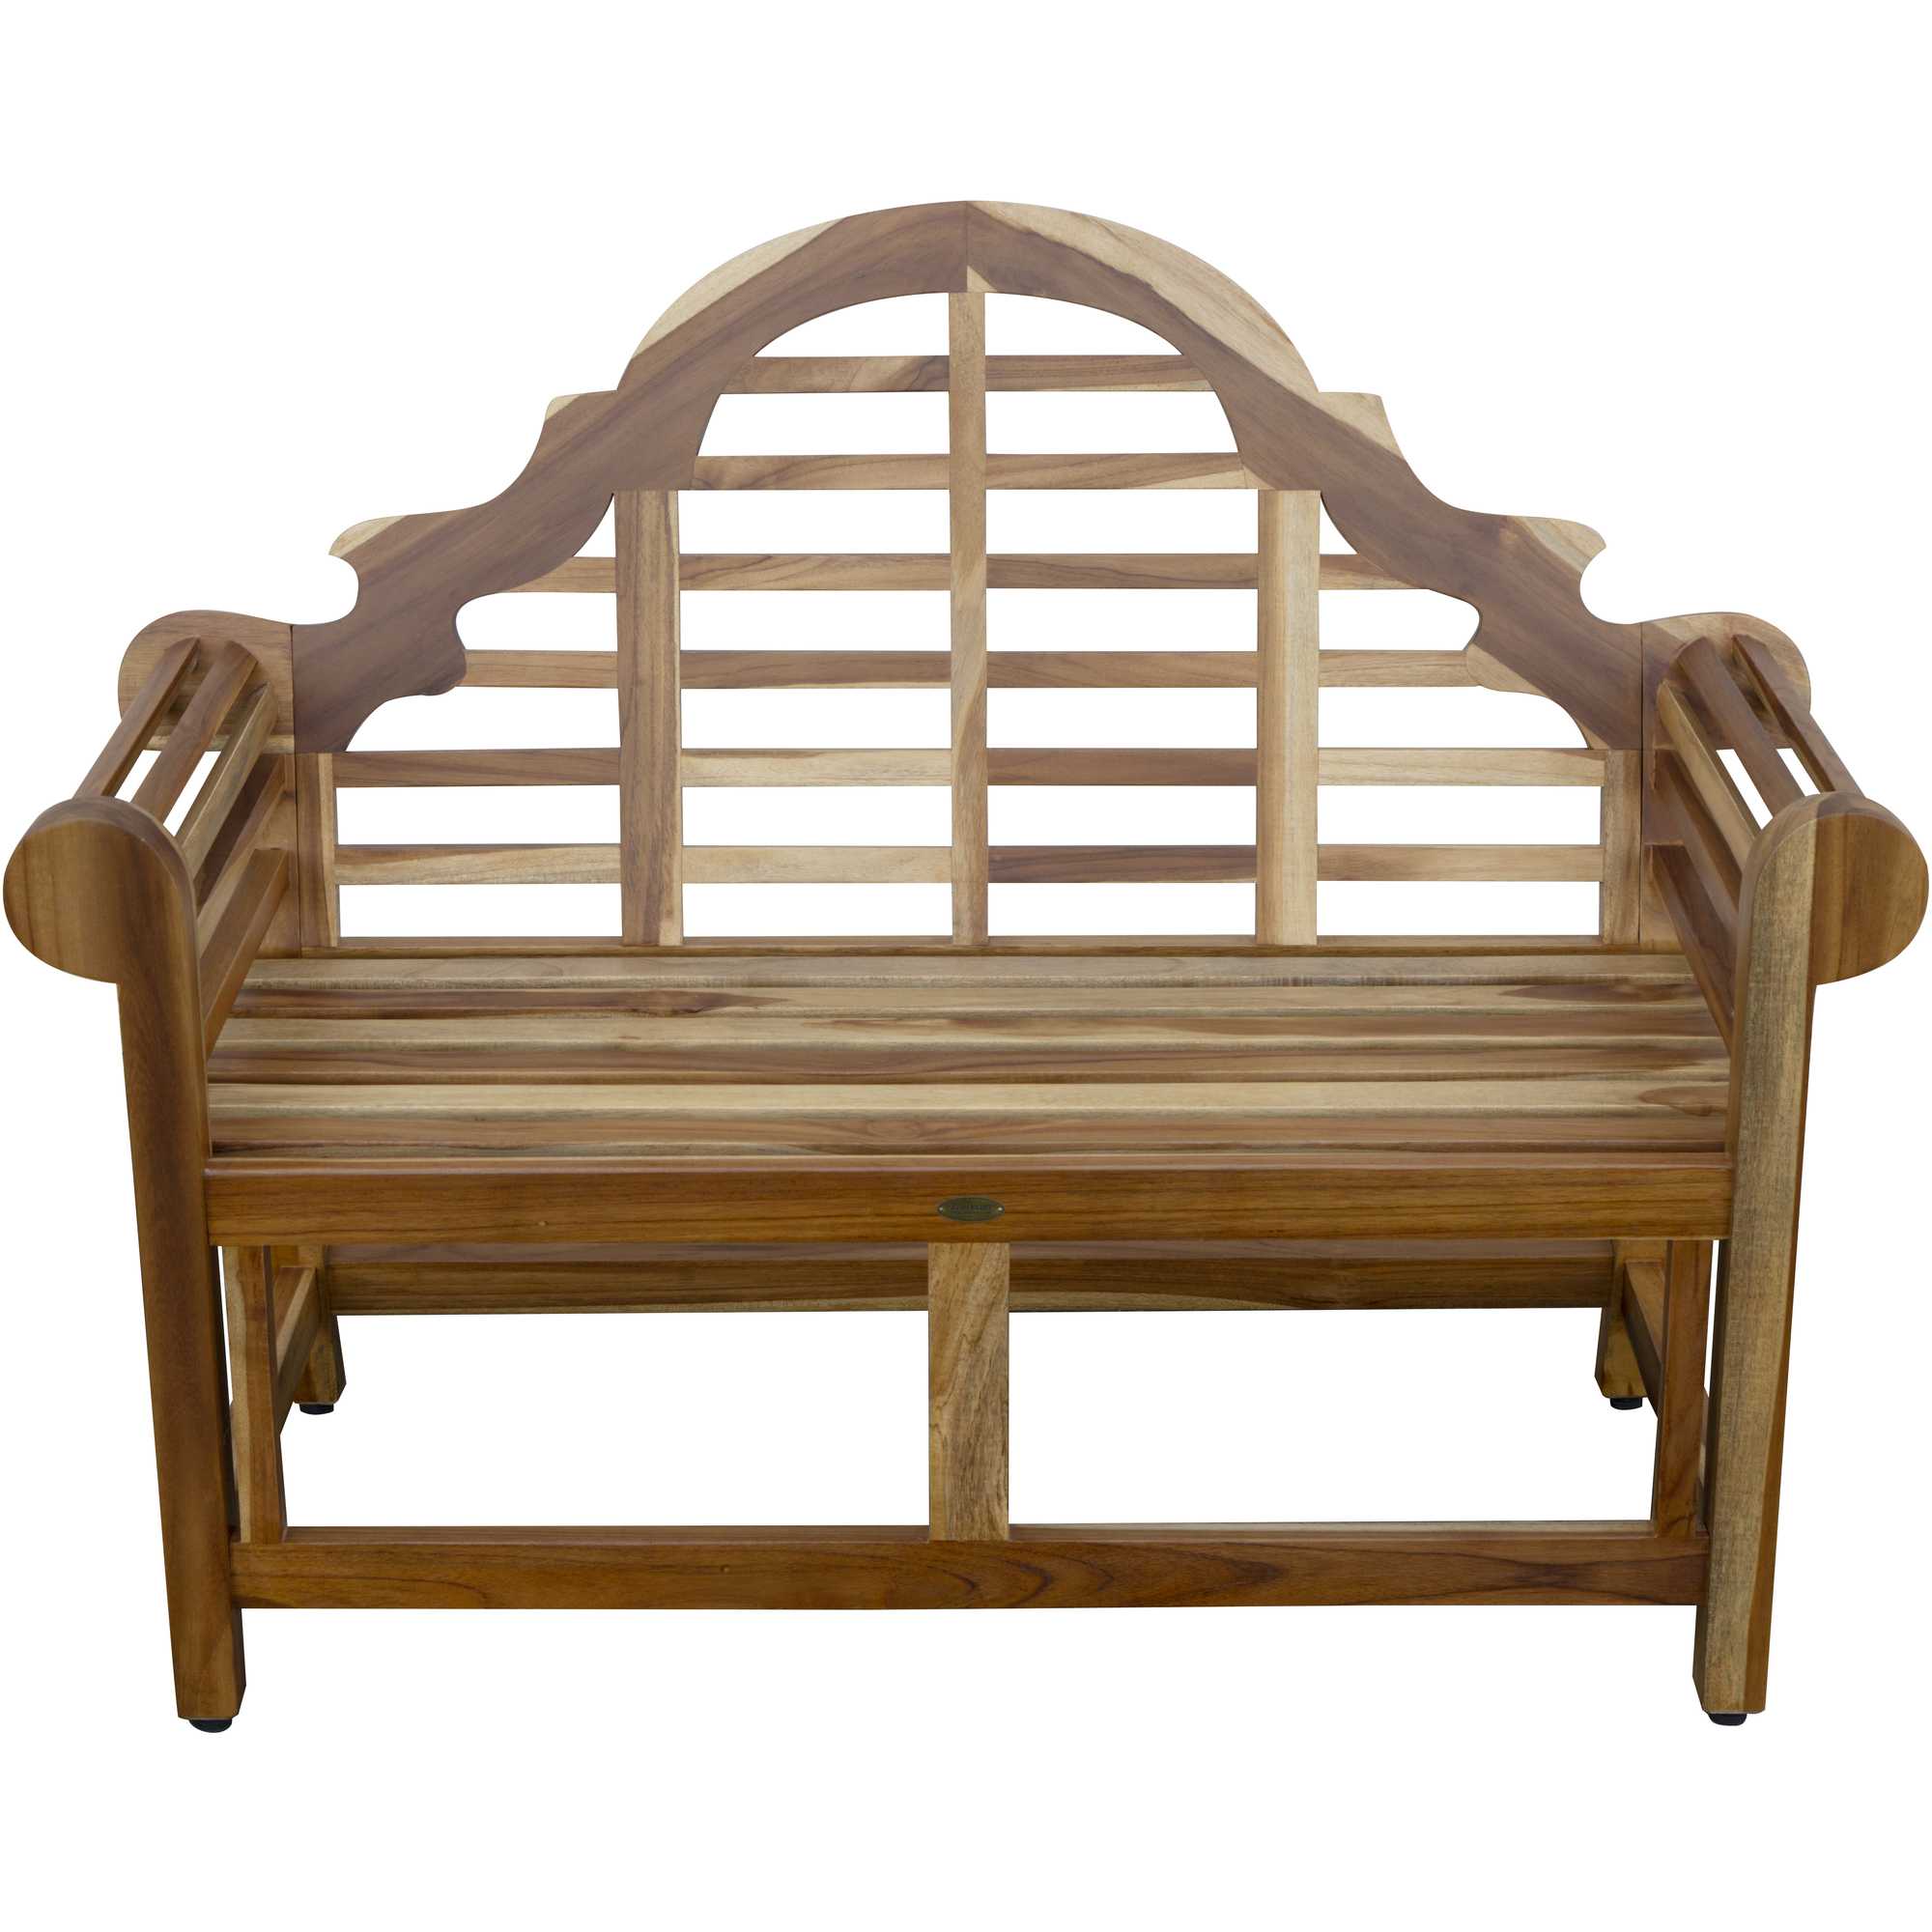 Compact Teak Outdoor Bench w/ Crown Design in Natural Finish